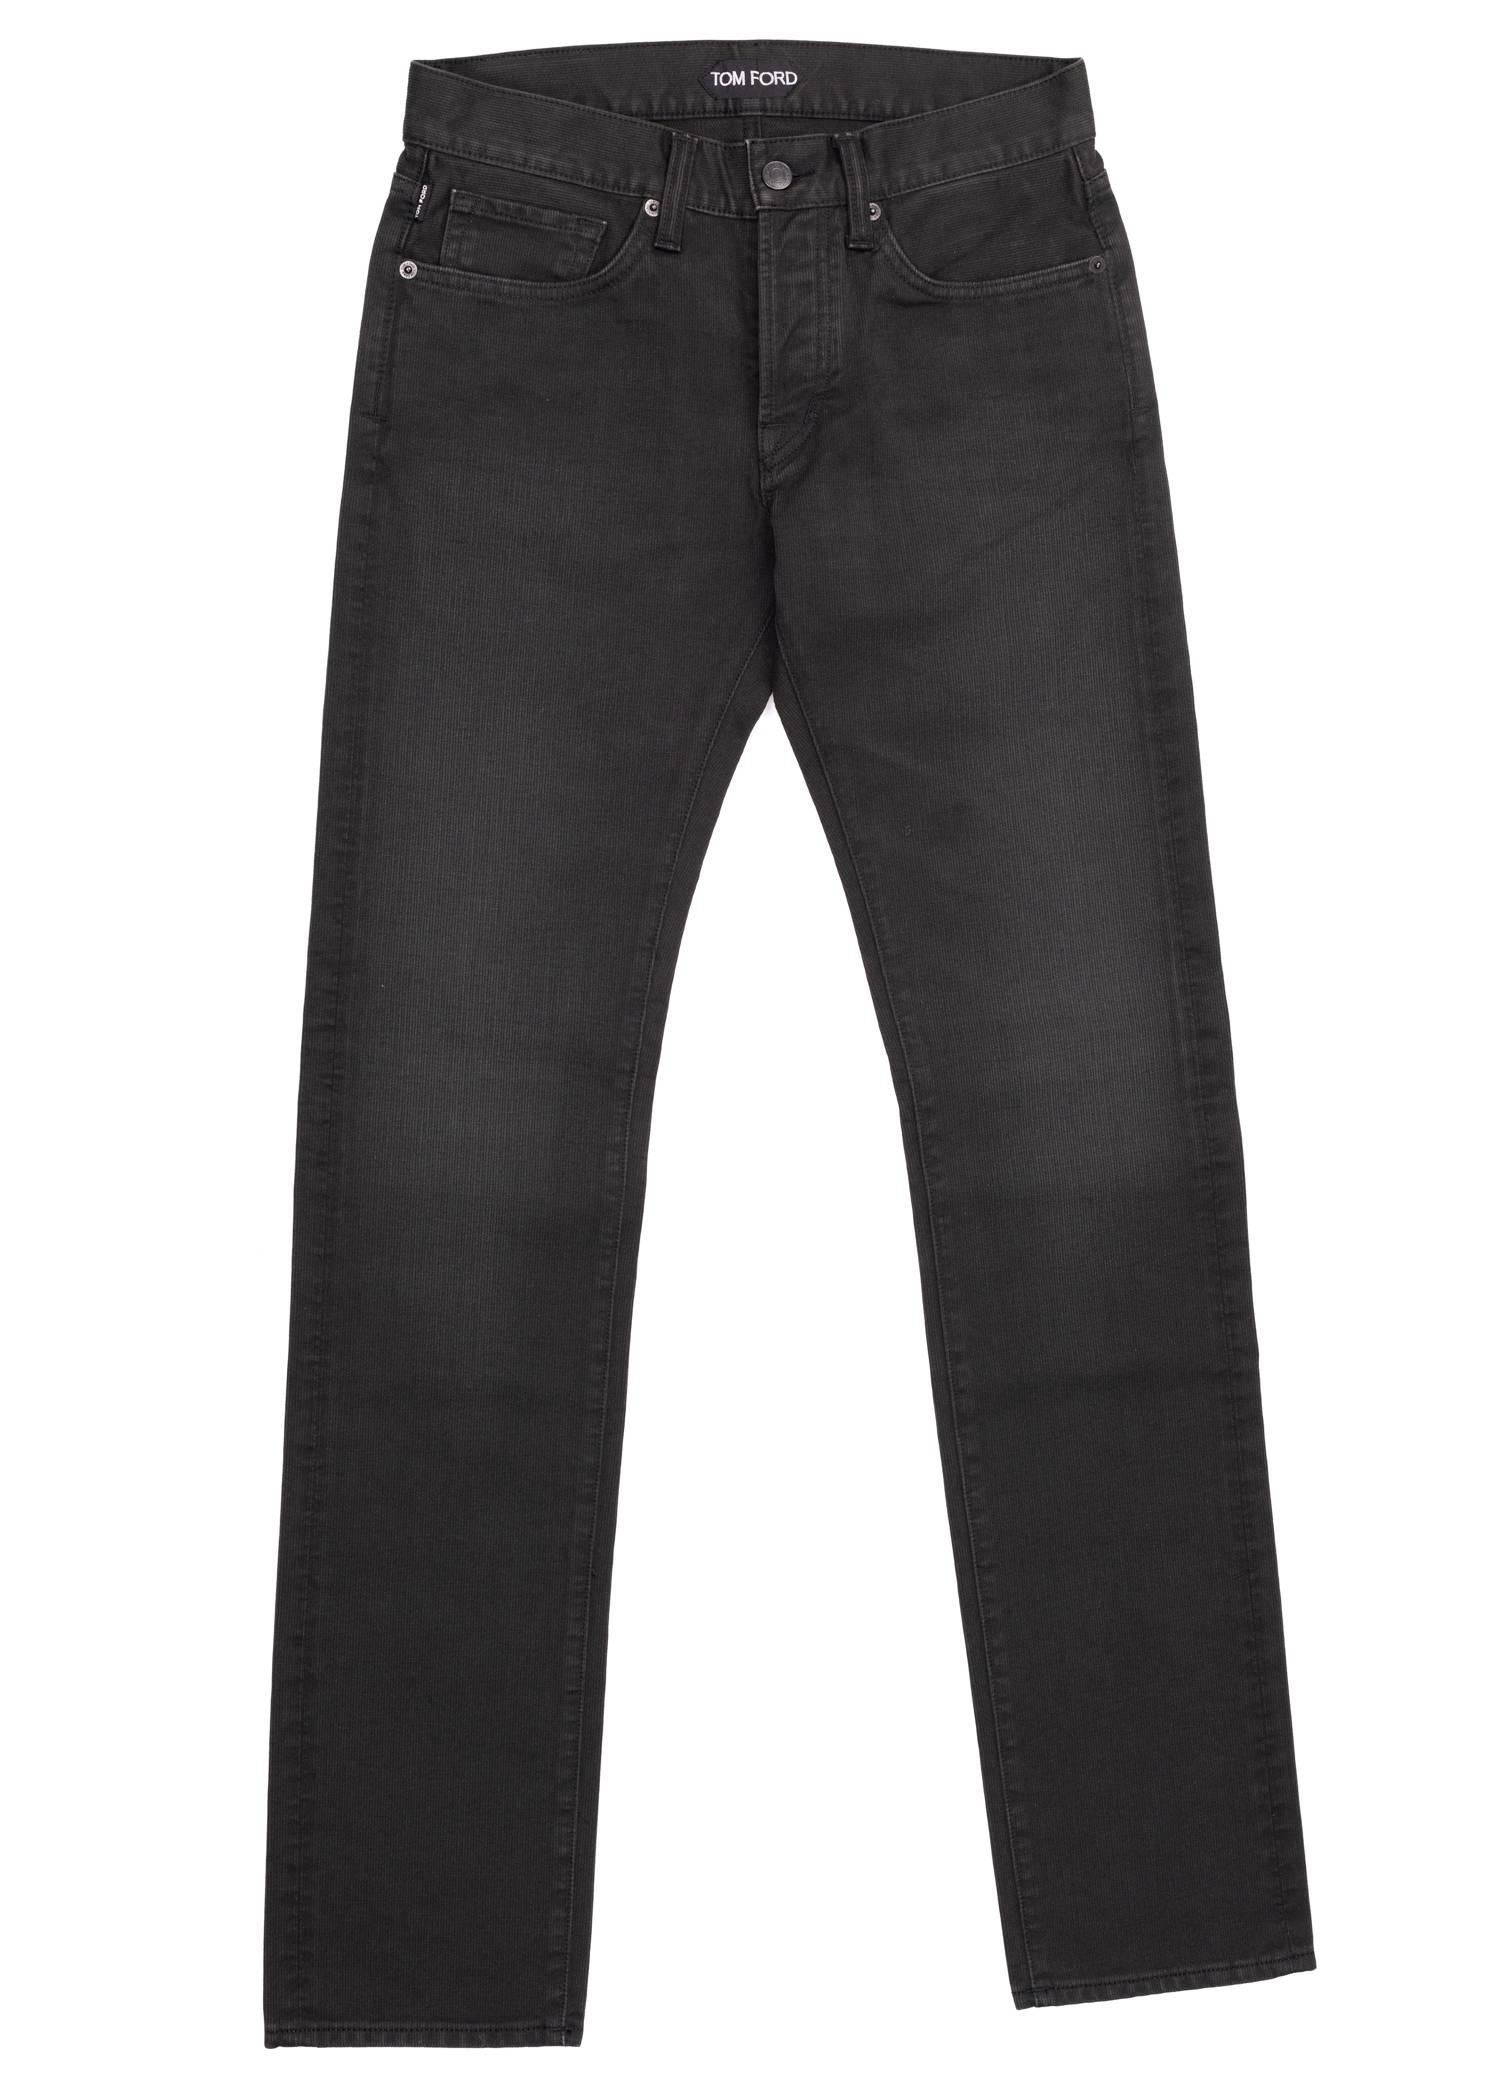 You can always rely on your Tom Ford Straight Leg Jeans for the occasion. This timeless pair was designed using durable cotton, a straight fit, and a four button front fly design. Pair these jeans with a slouchy white top for the perfect all purpose